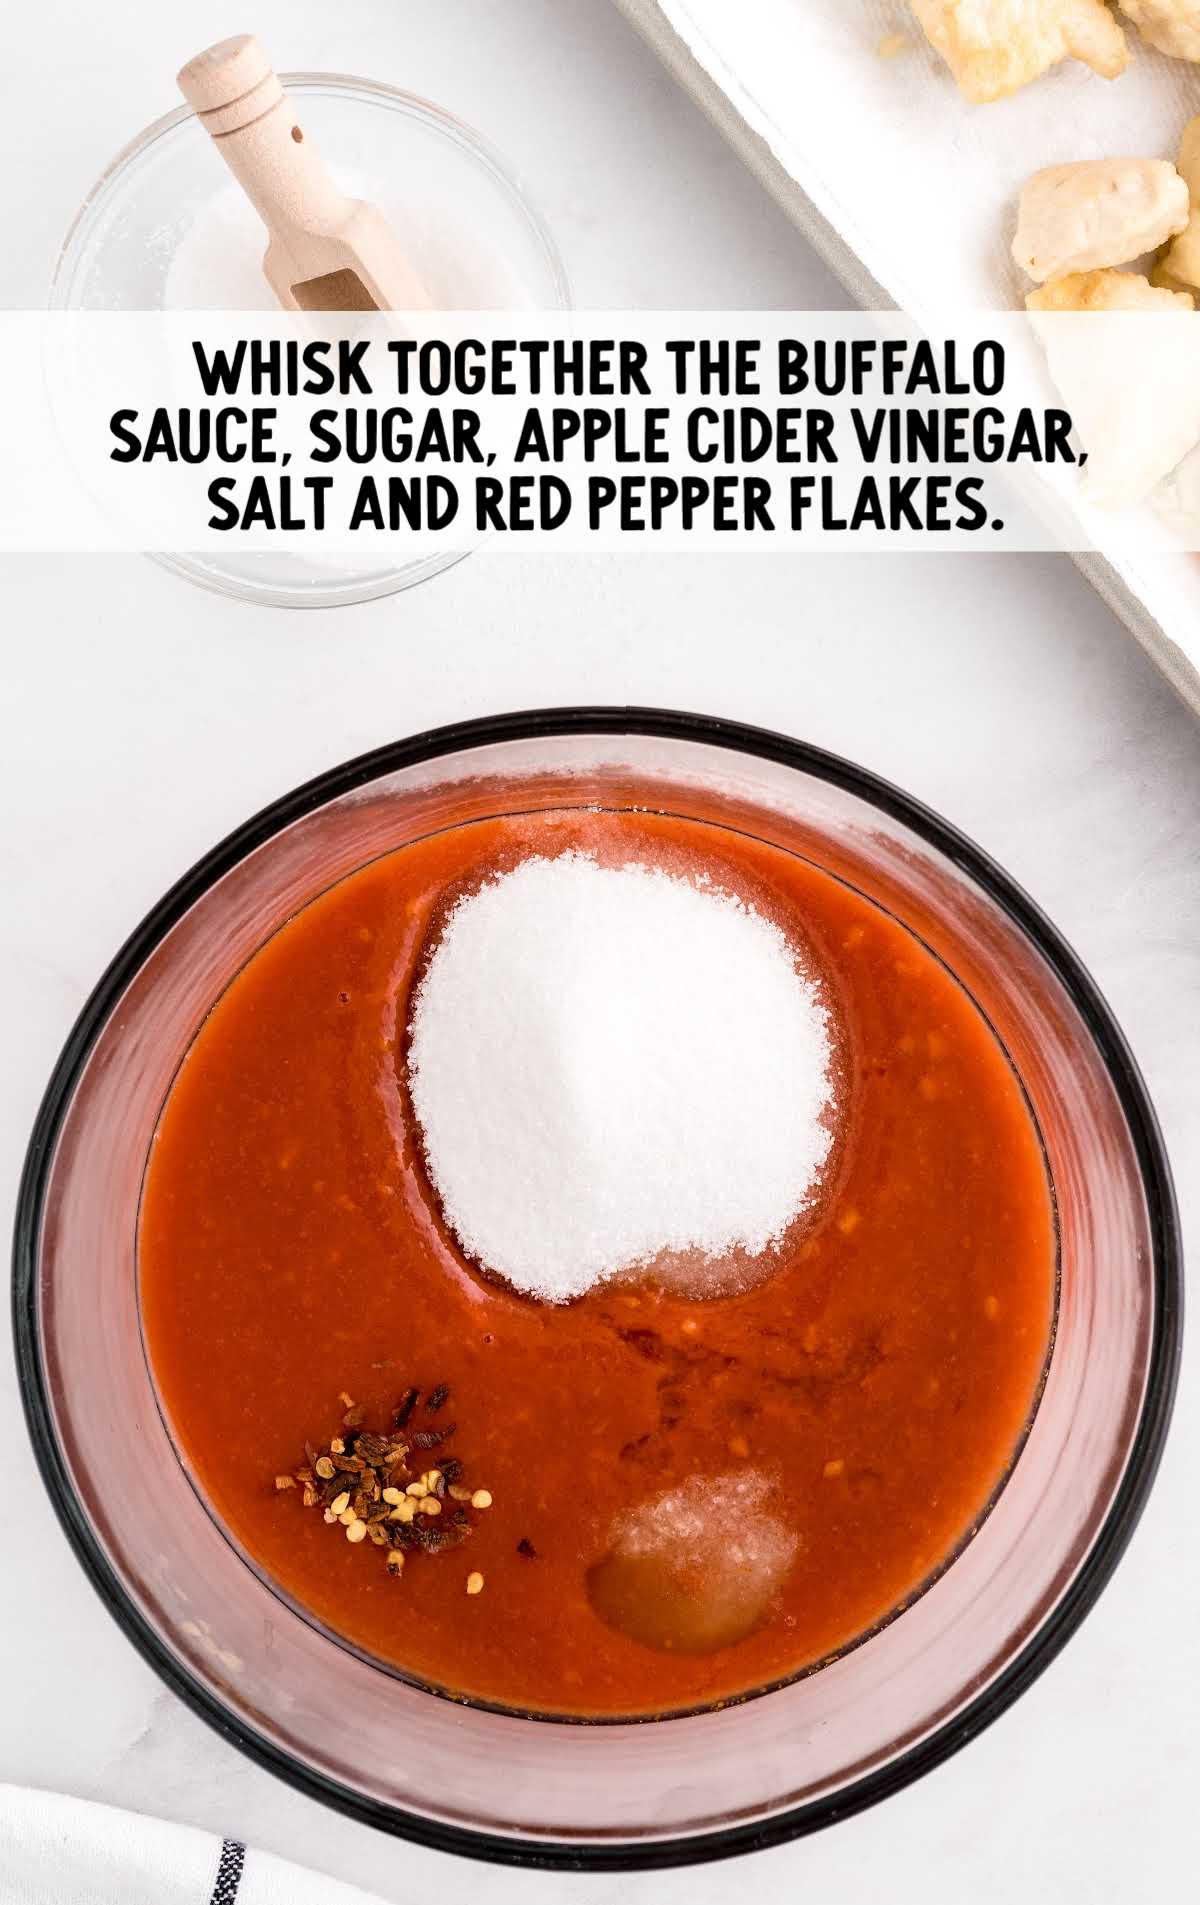 buffalo sauce, sugar, apple cider vinegar, salt and red pepper flakes whisked in a bowl